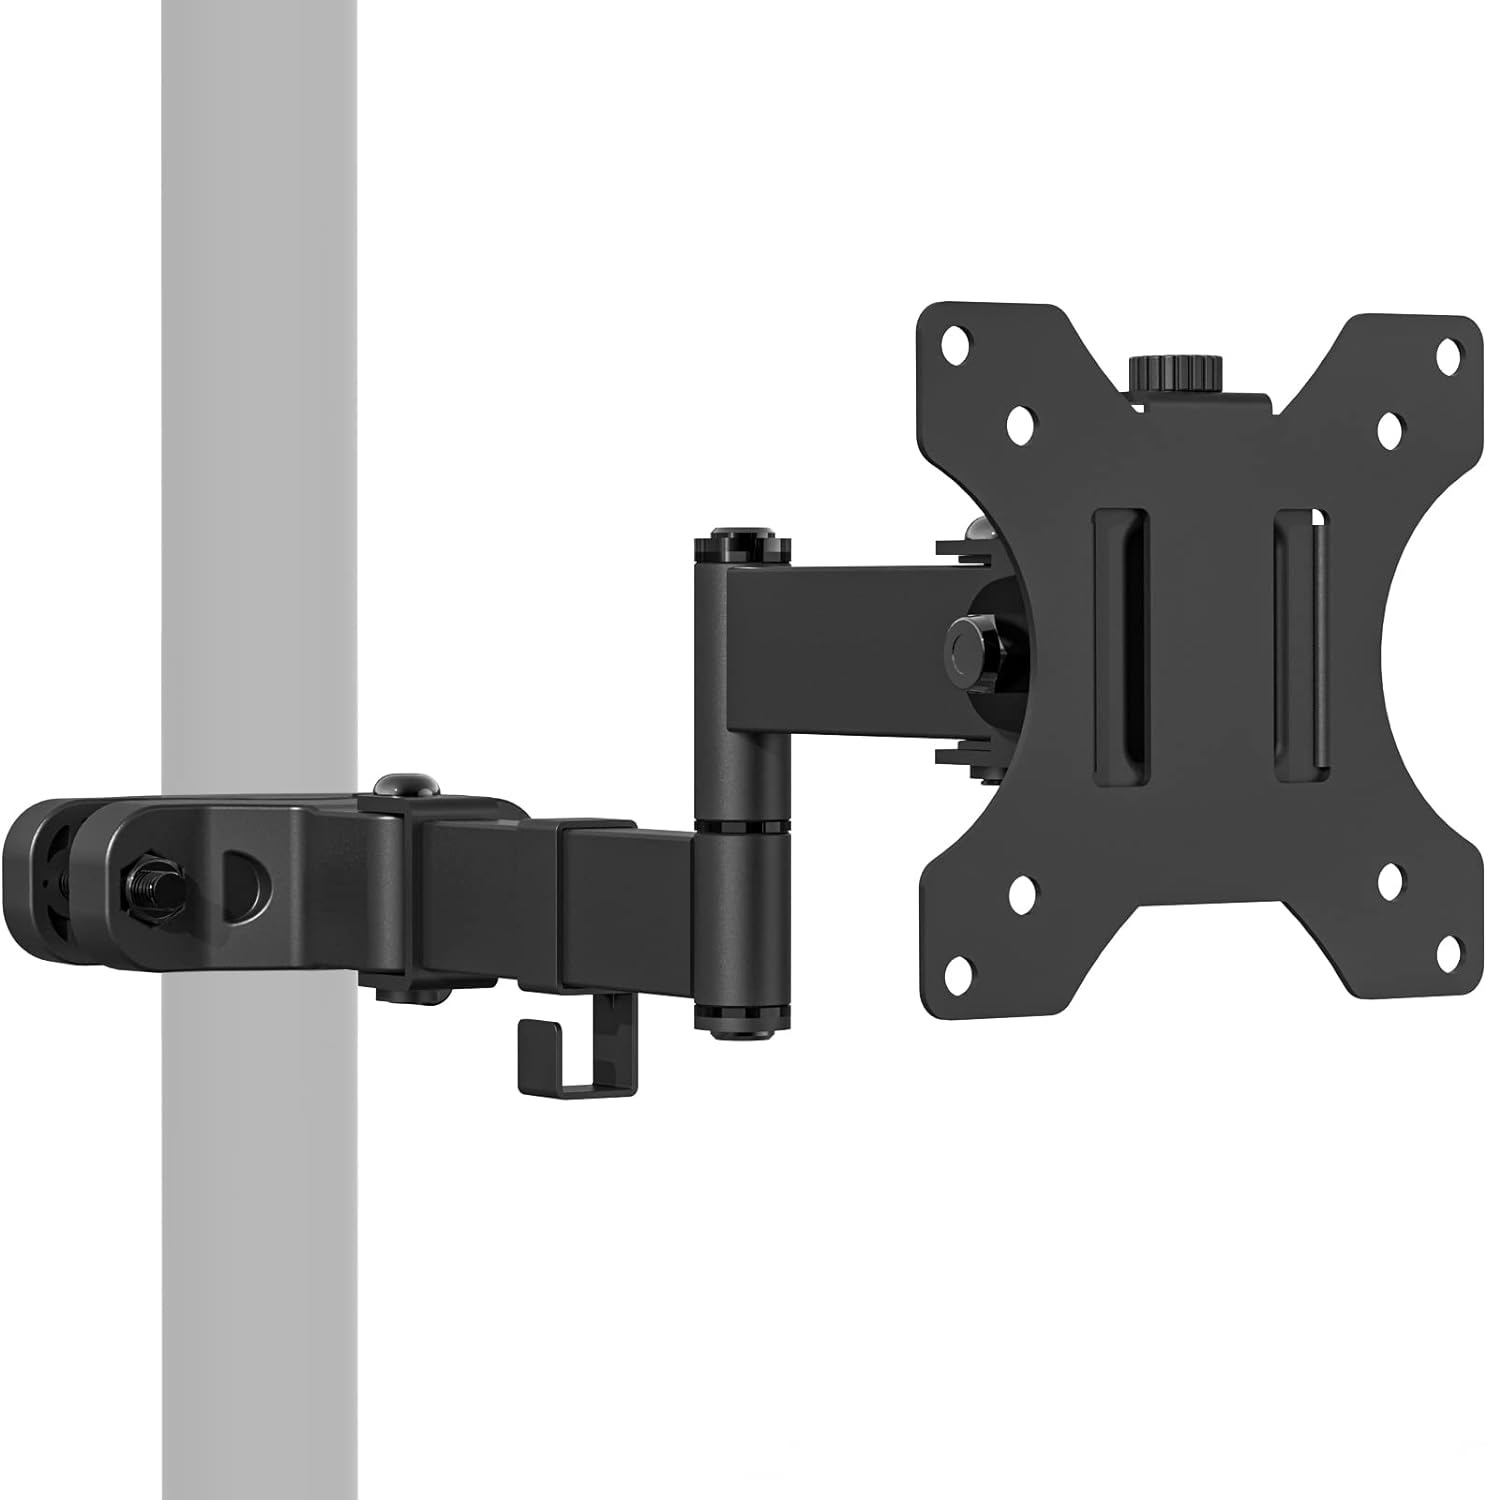 WALI Single Monitor Arm VESA Mount, Fully Adjustable 2 Tier with 75mm and 100mm